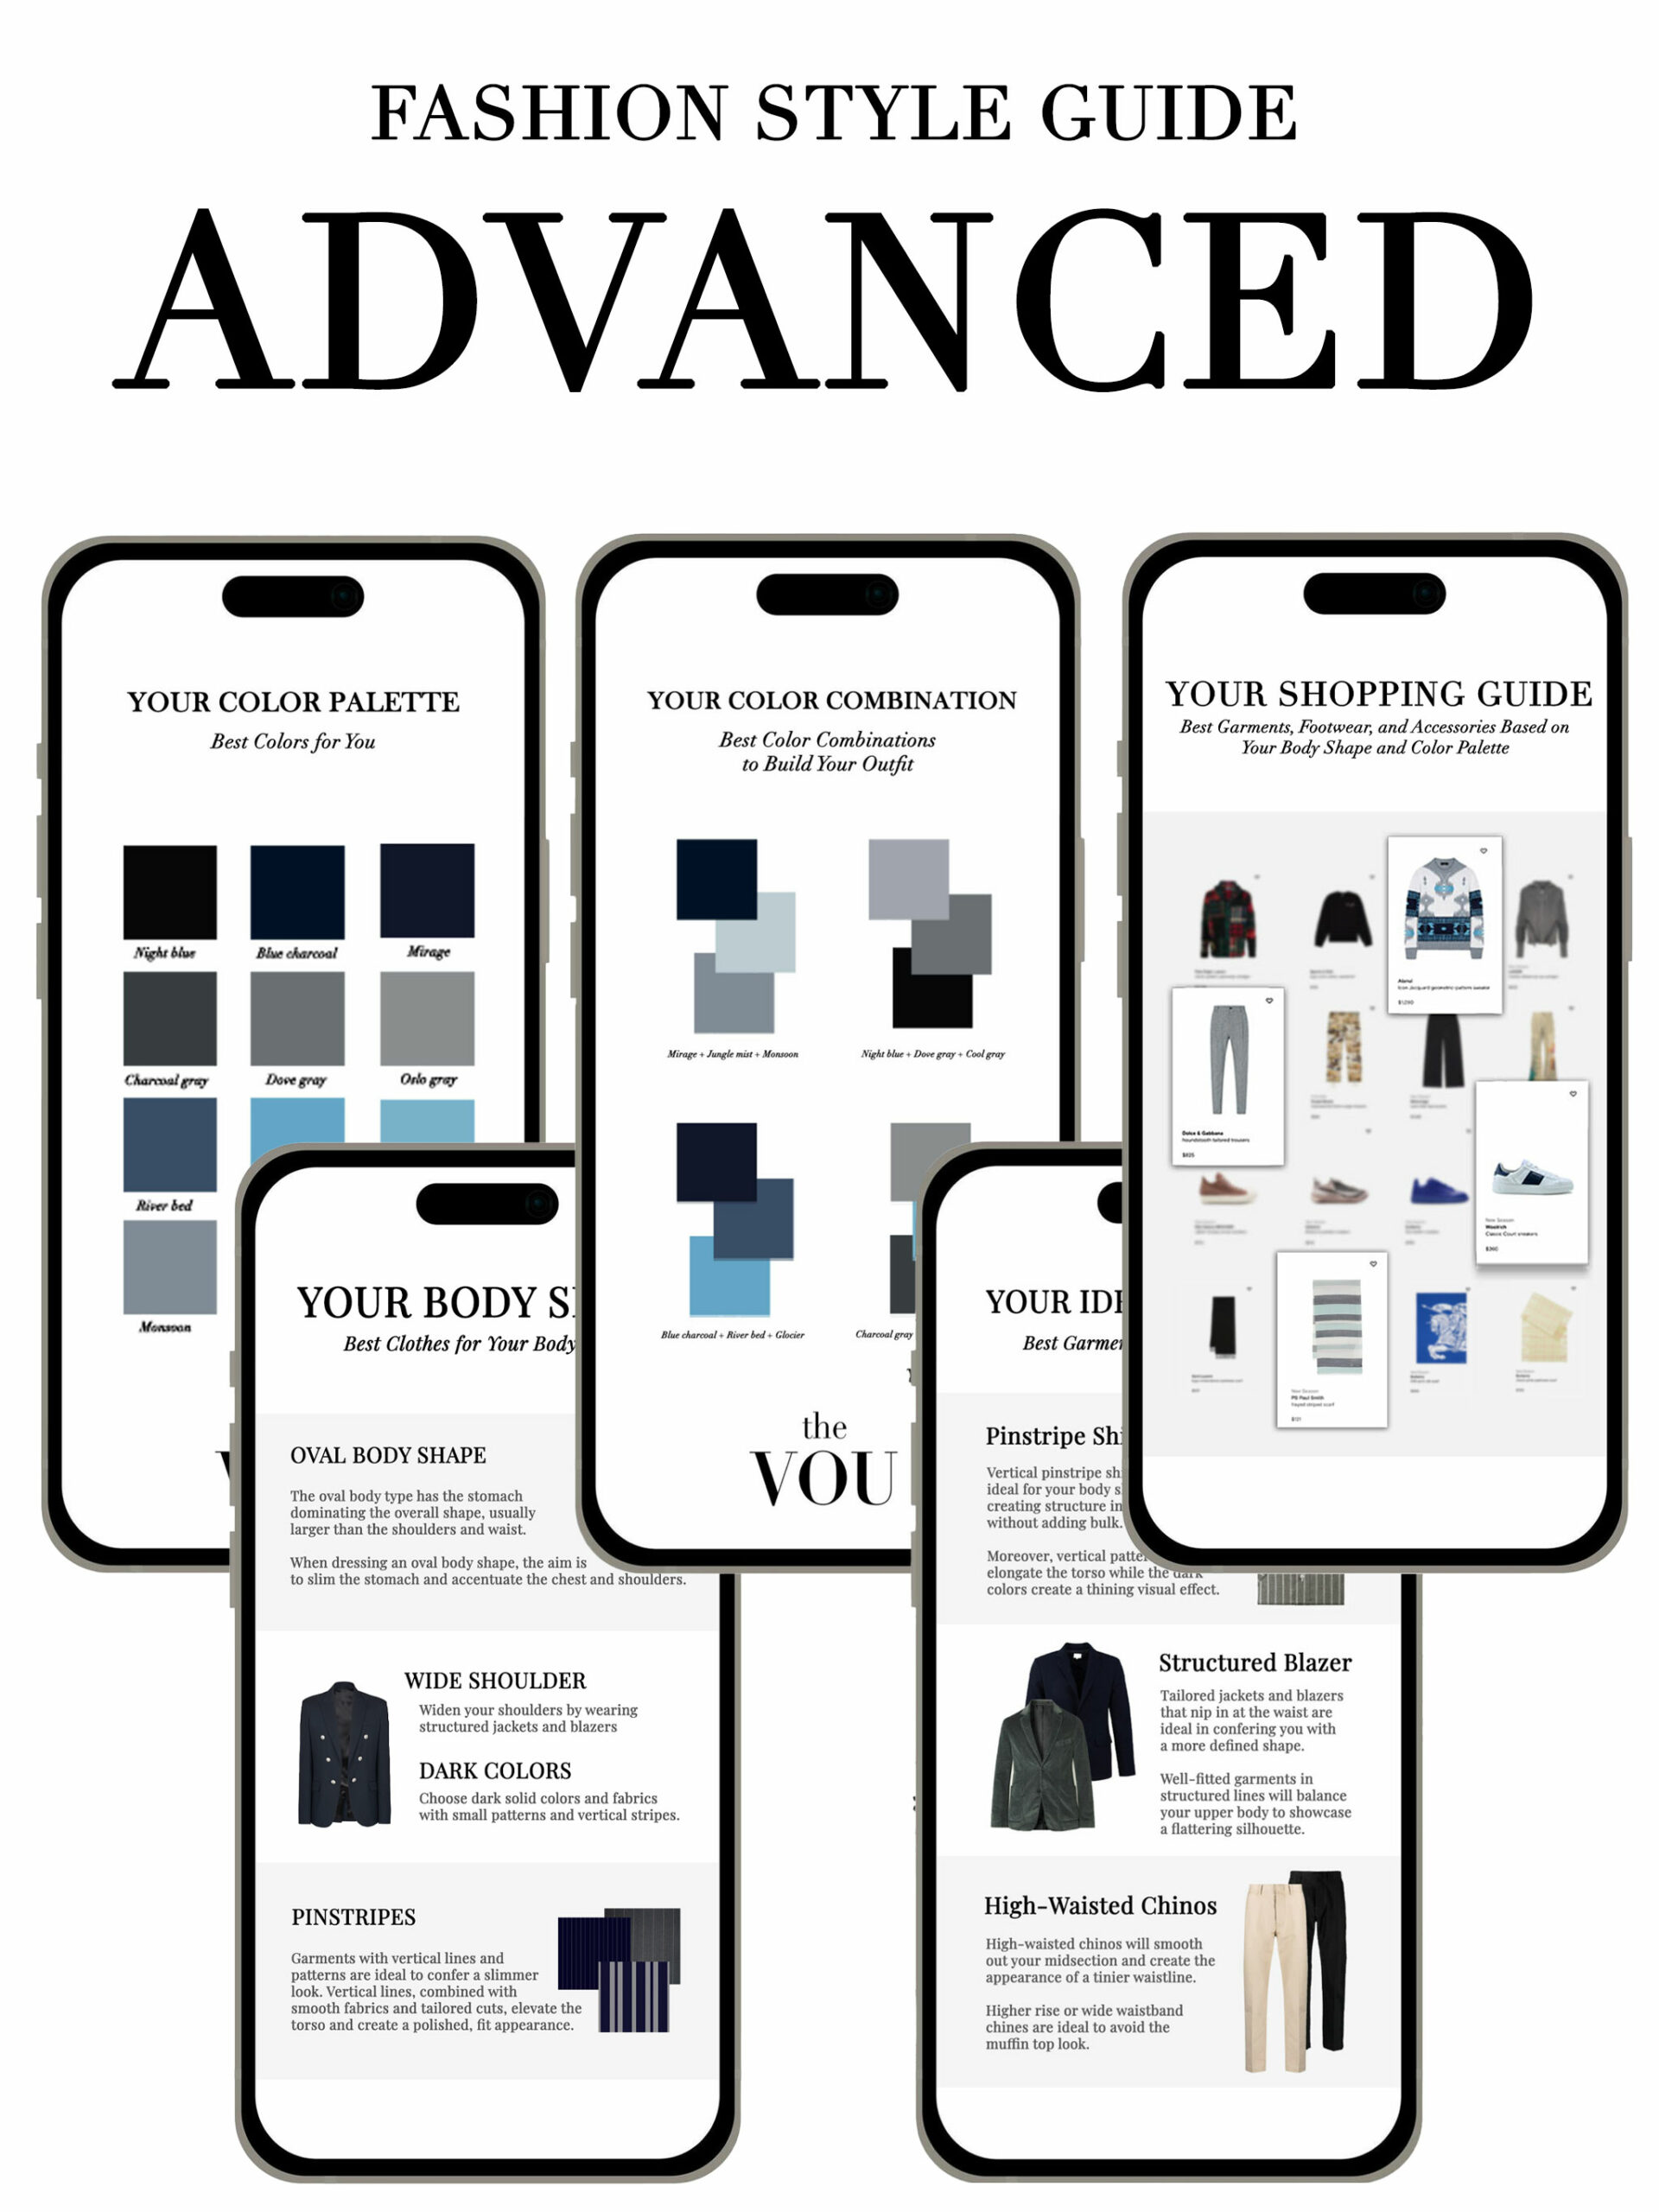 Fashion style guide for men advanced package